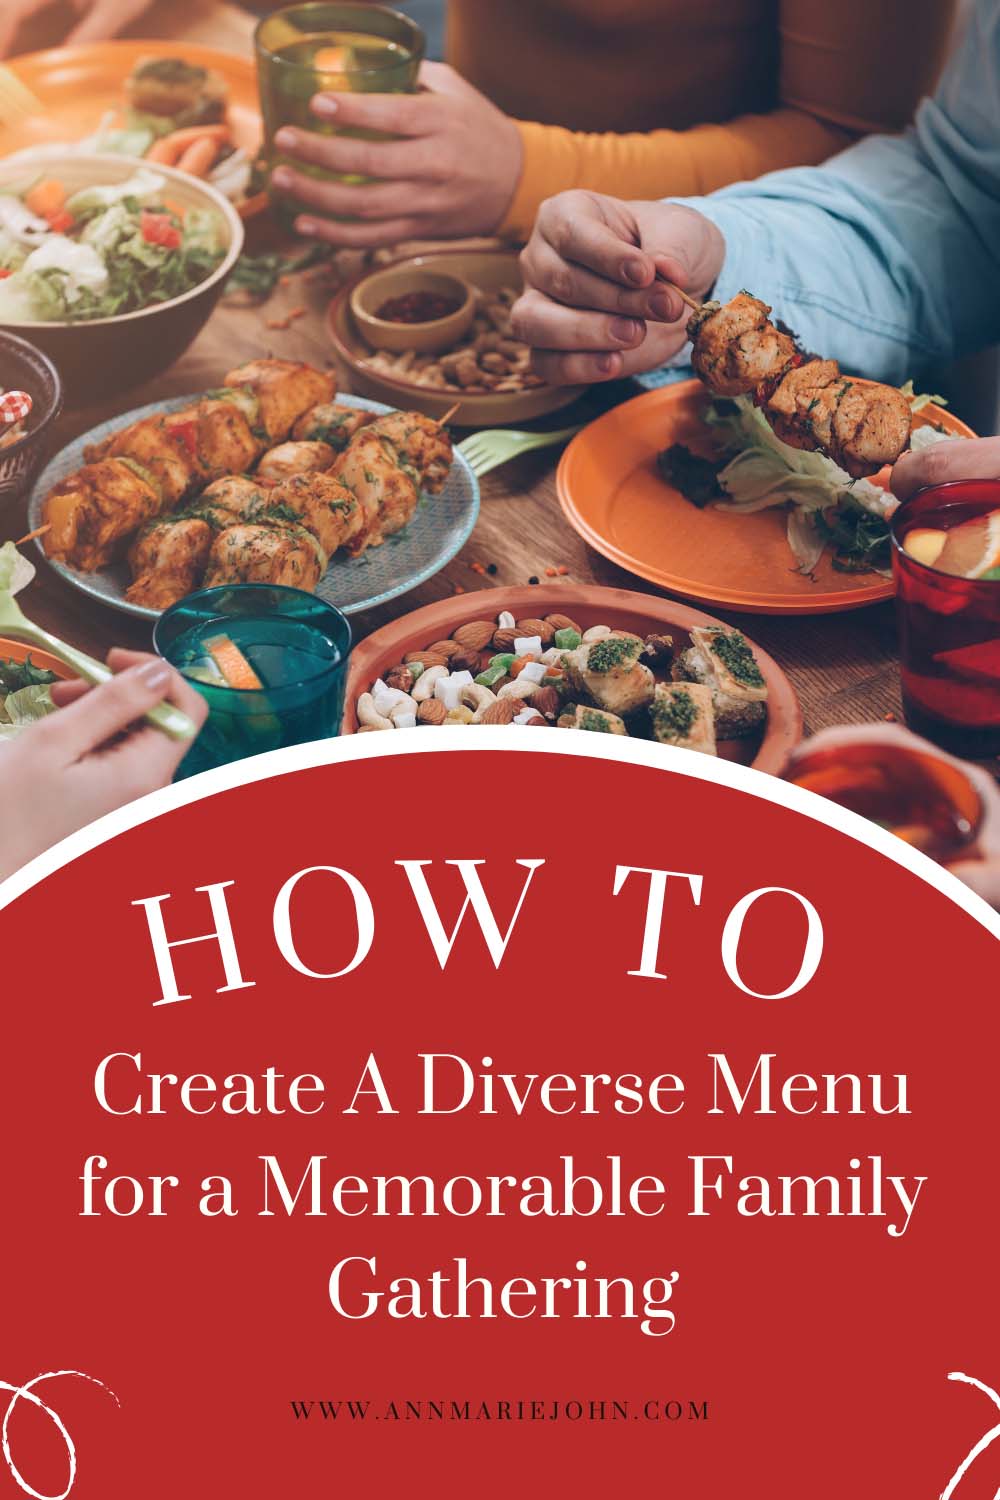 How to Create a Diverse Menu for a Memorable Family Gathering